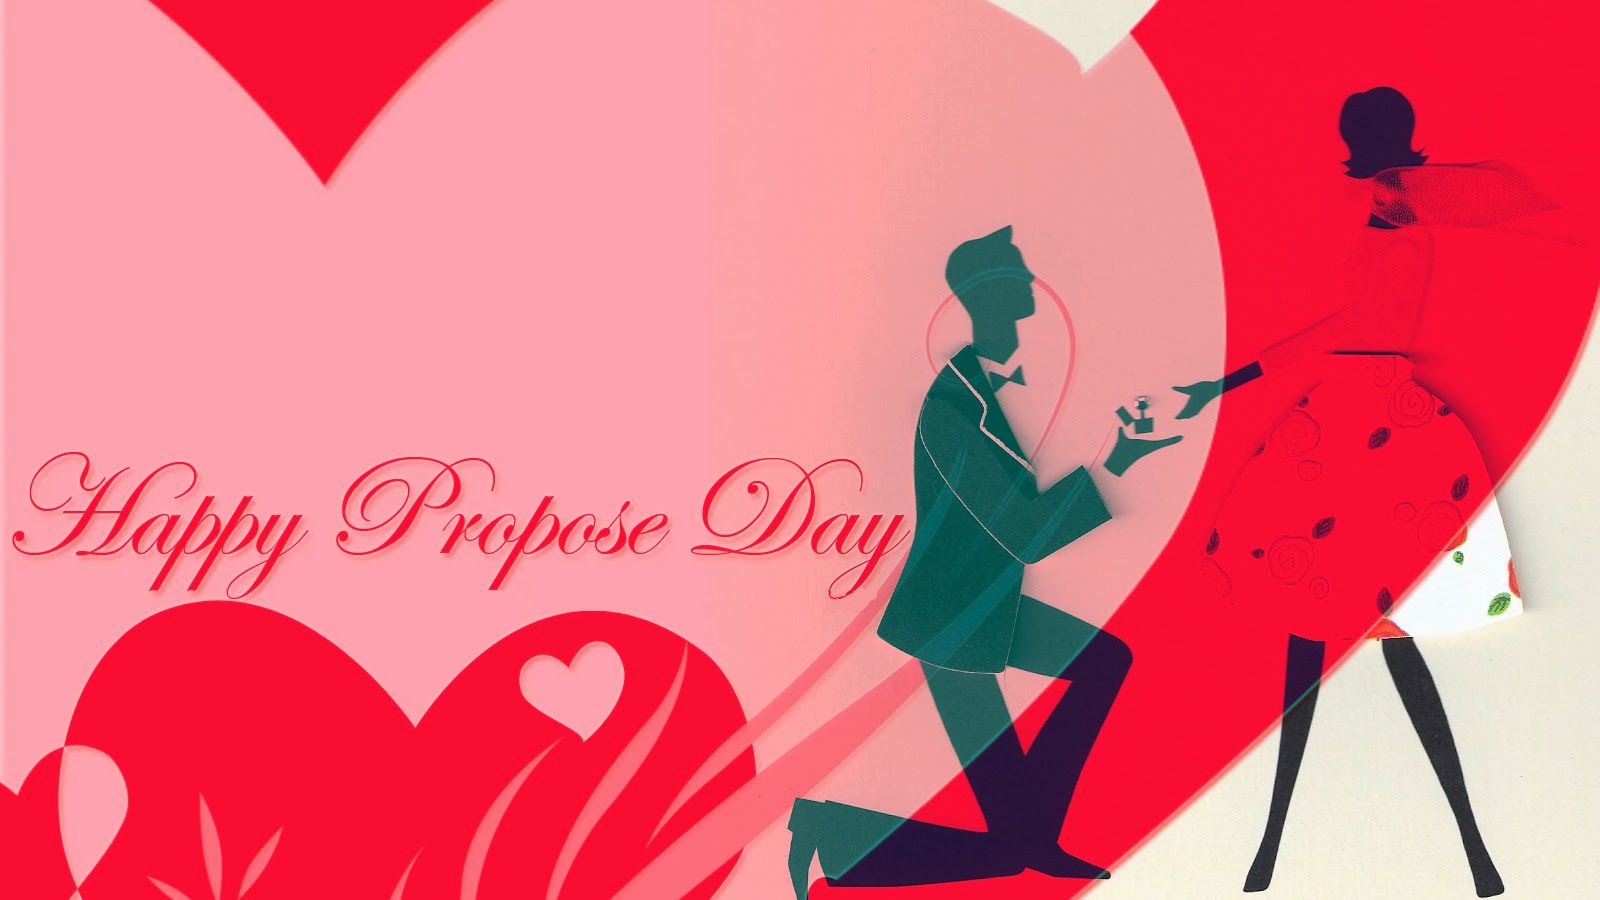 Propose Day Image 2018 with Message & Quote For Whatsapp Dp & Profile